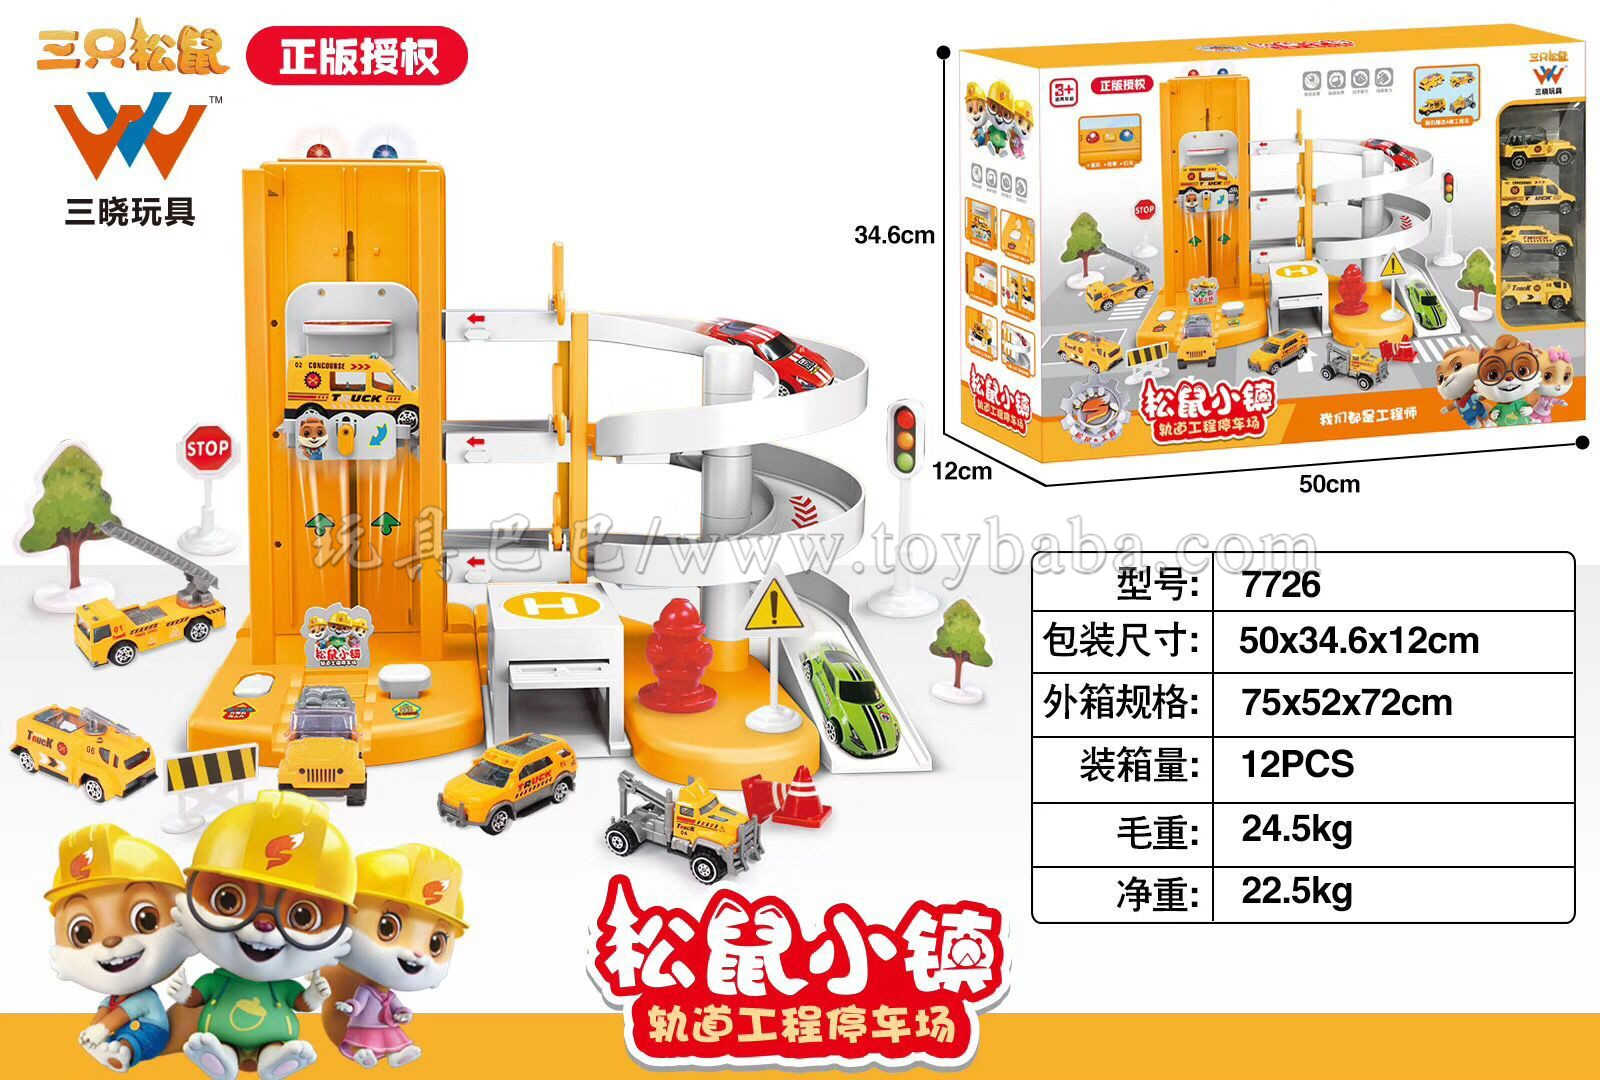 Automatic lifting engineering parking lot self-contained toy rail car with 5 alloy car